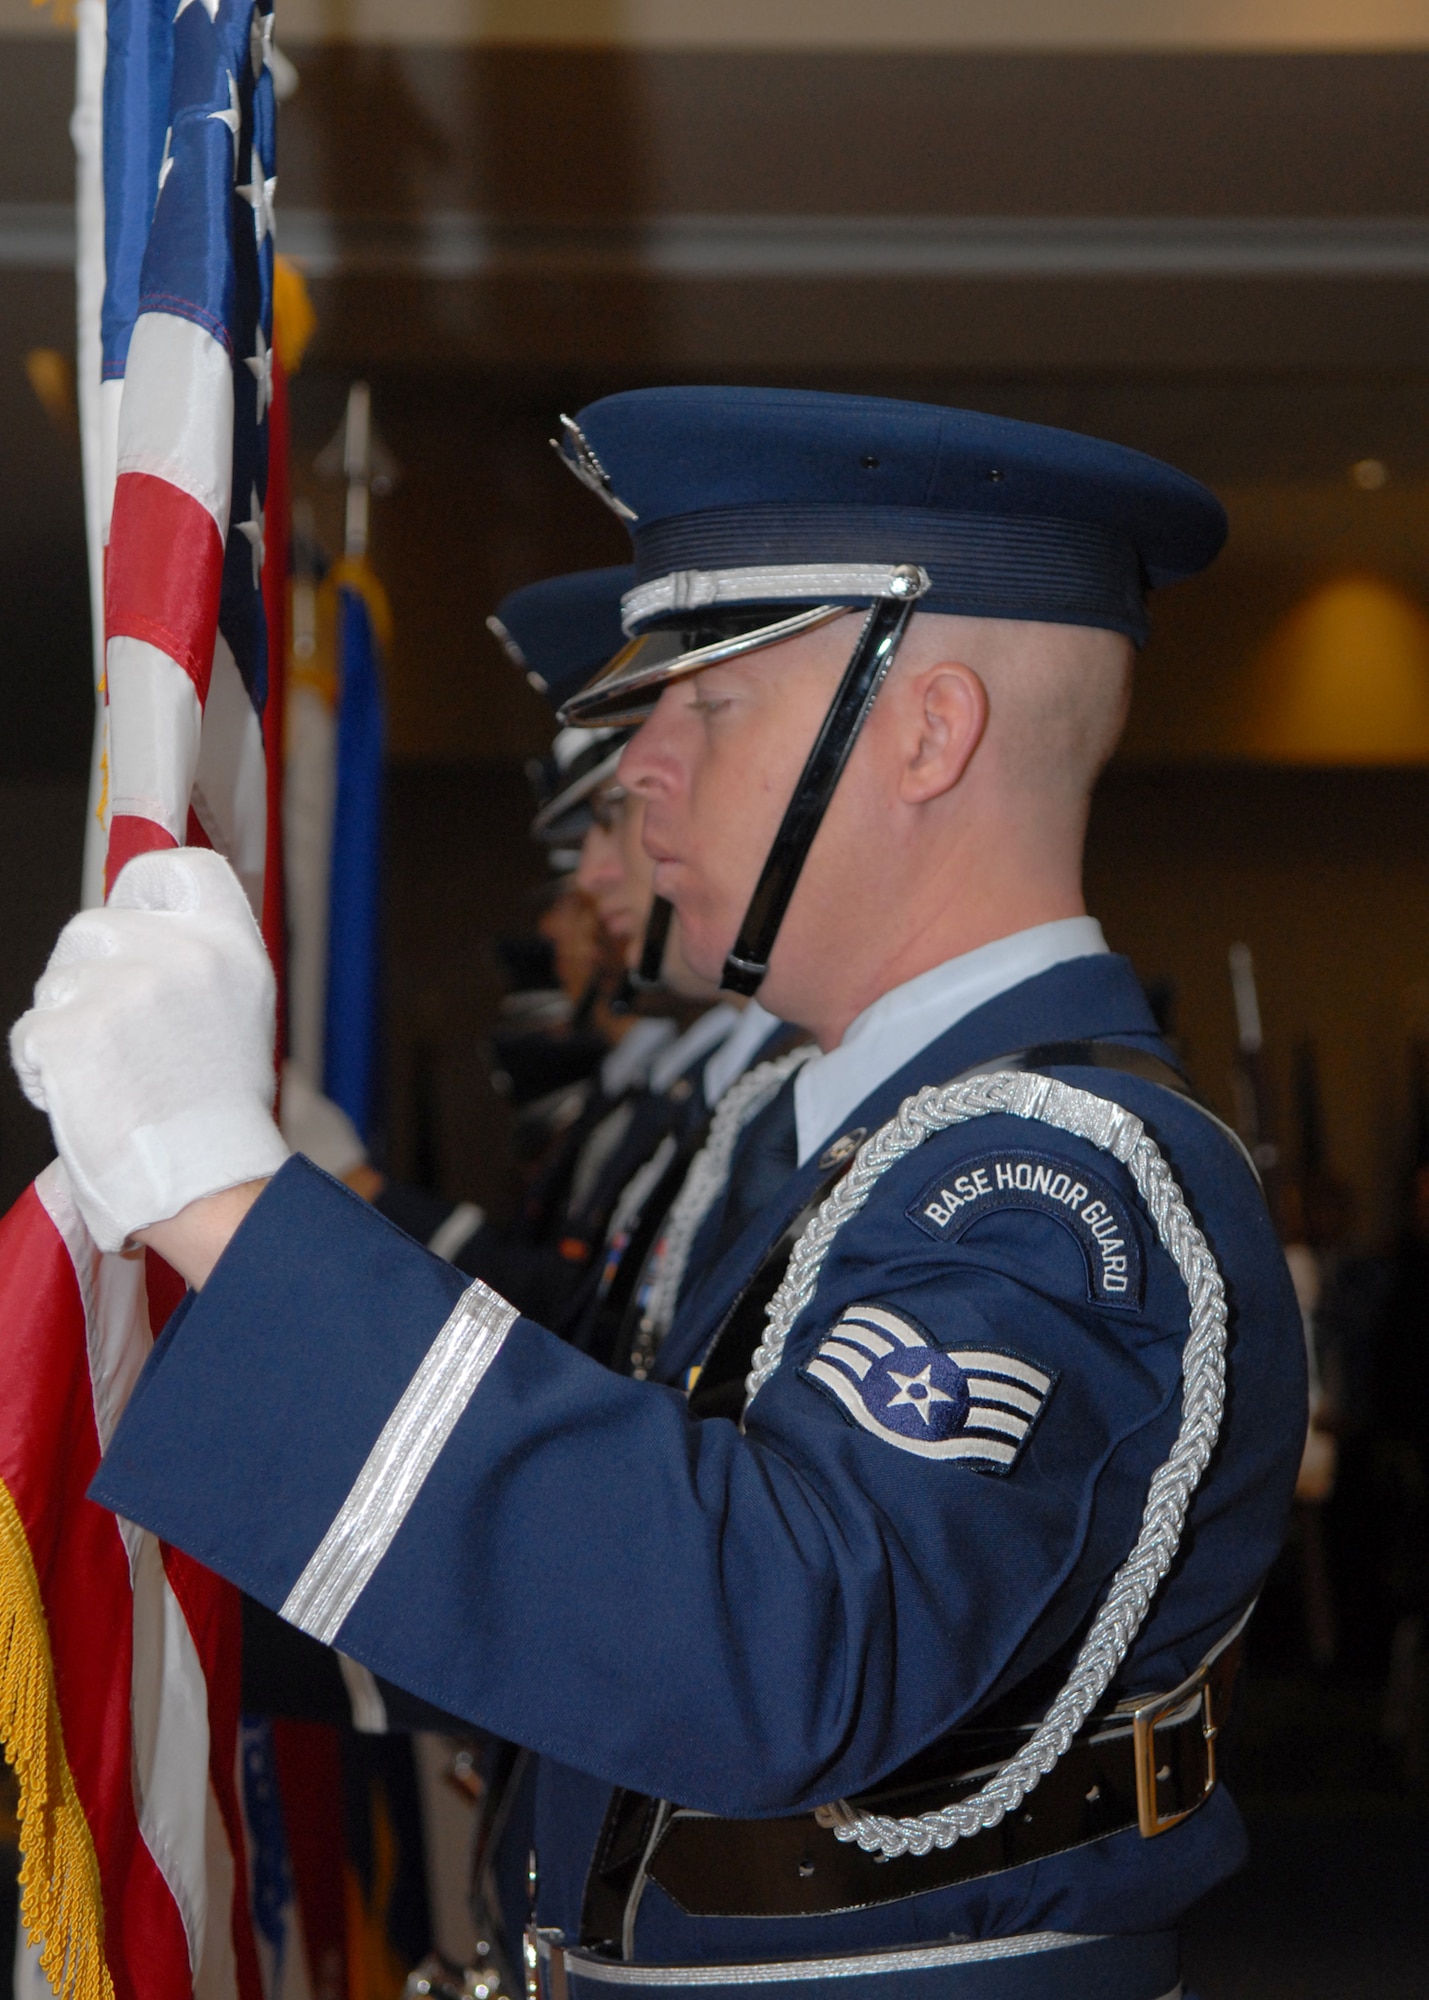 VANDENBERG AIR FORCE BASE, Calif. --Members of team Vandenberg’s Honor Guard post the colors during the Retired Member Appreciation Day Saturday, Nov.14, 2009 at the Pacific Coast Club here. The event is held to recognize the contributions of retired military members, including those who served on active, guard and reserve duty. (U.S. Air Force photo/Airman 1st Class Kerelin Molina)